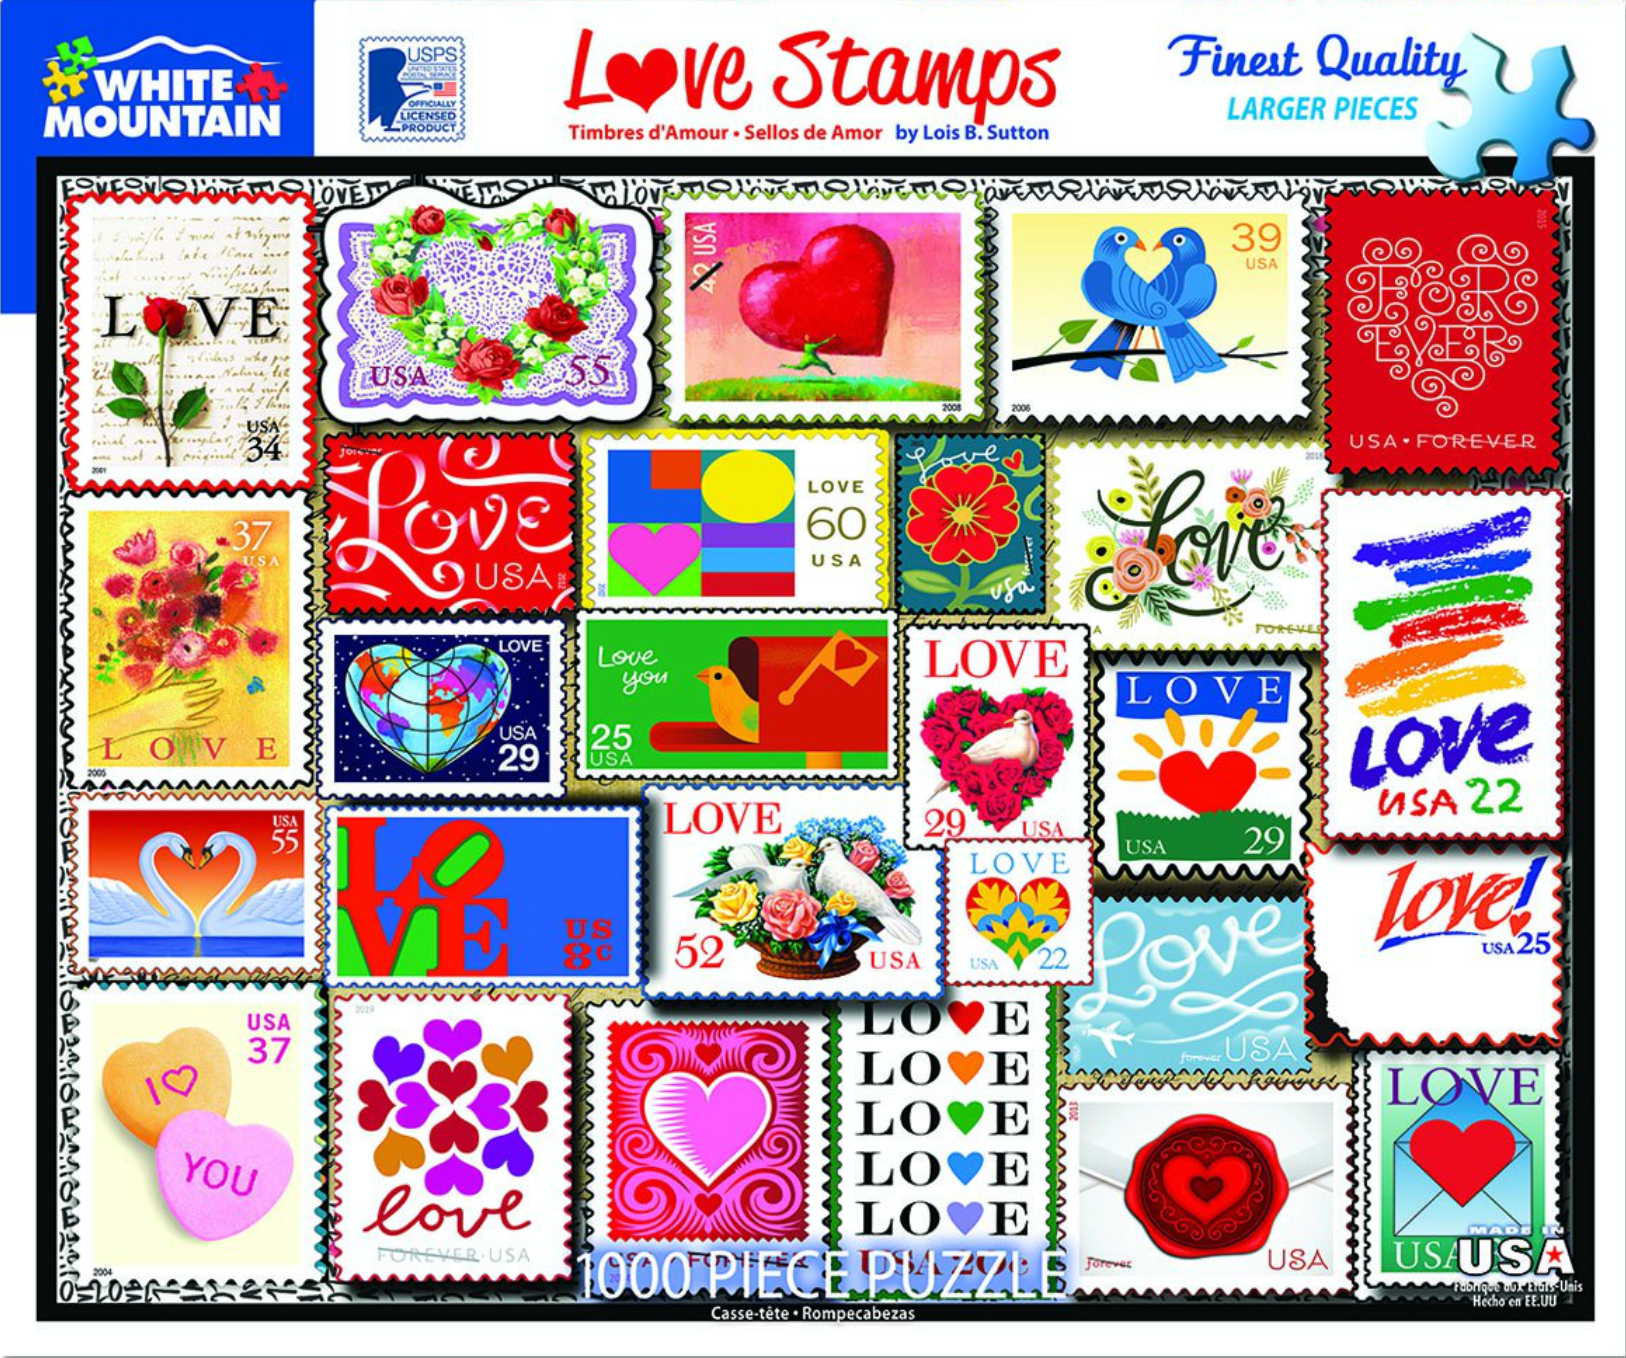 Love Stamps (1000 pc puzzle)